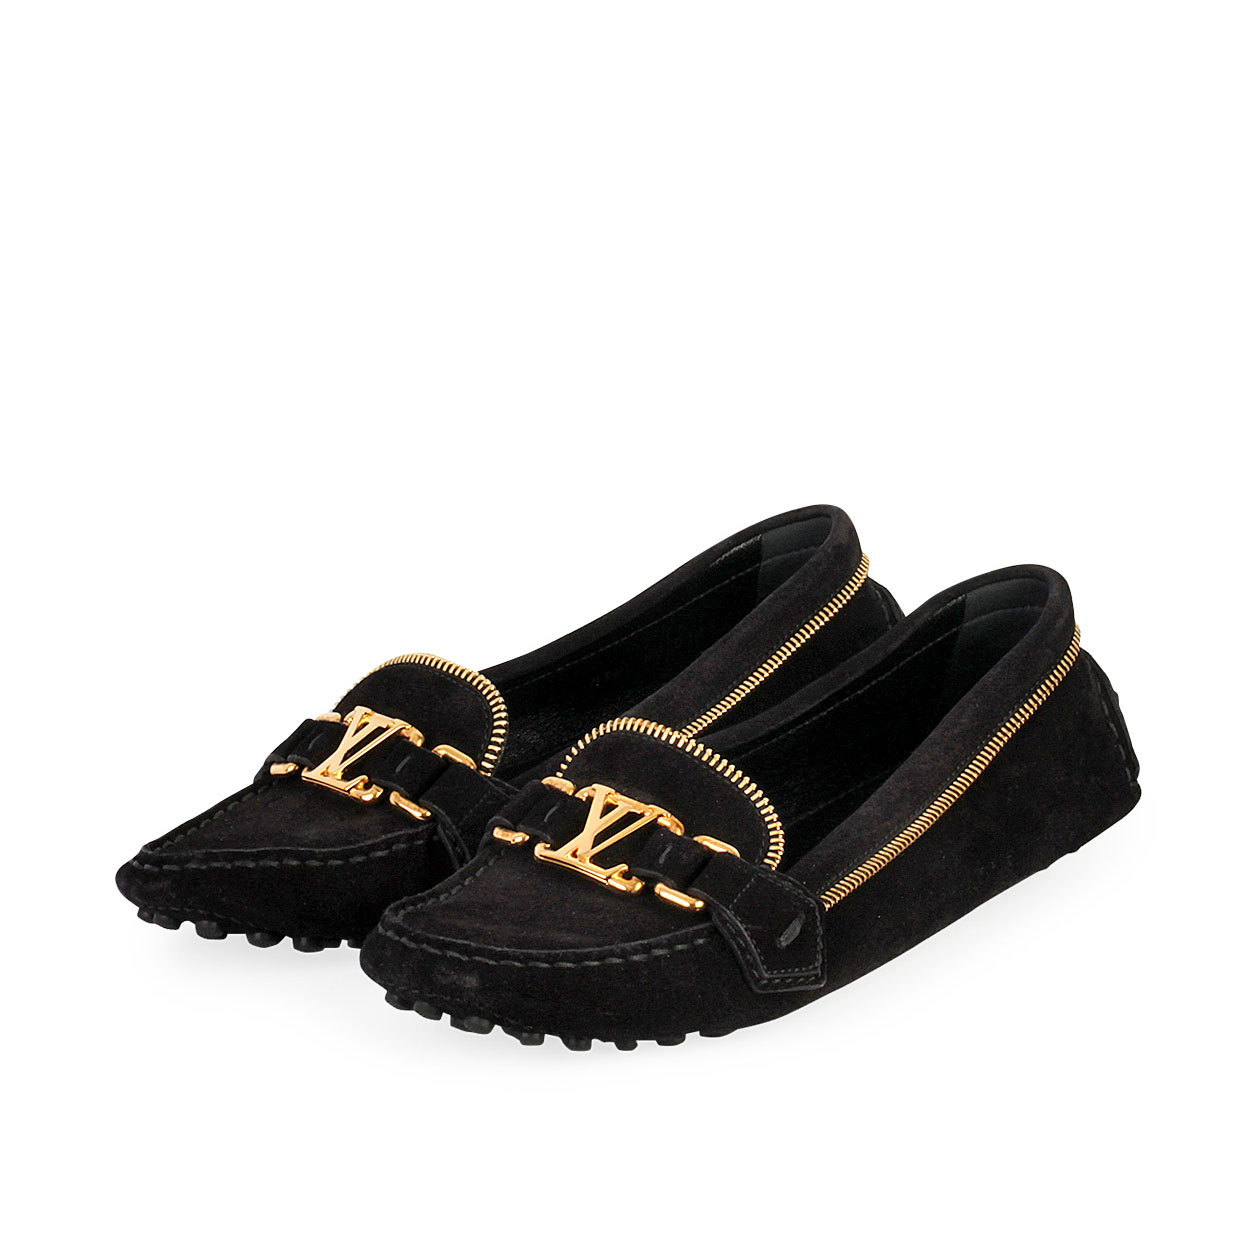 Louis Vuitton Suede Zip Loafers Black S 38 5 Luxity